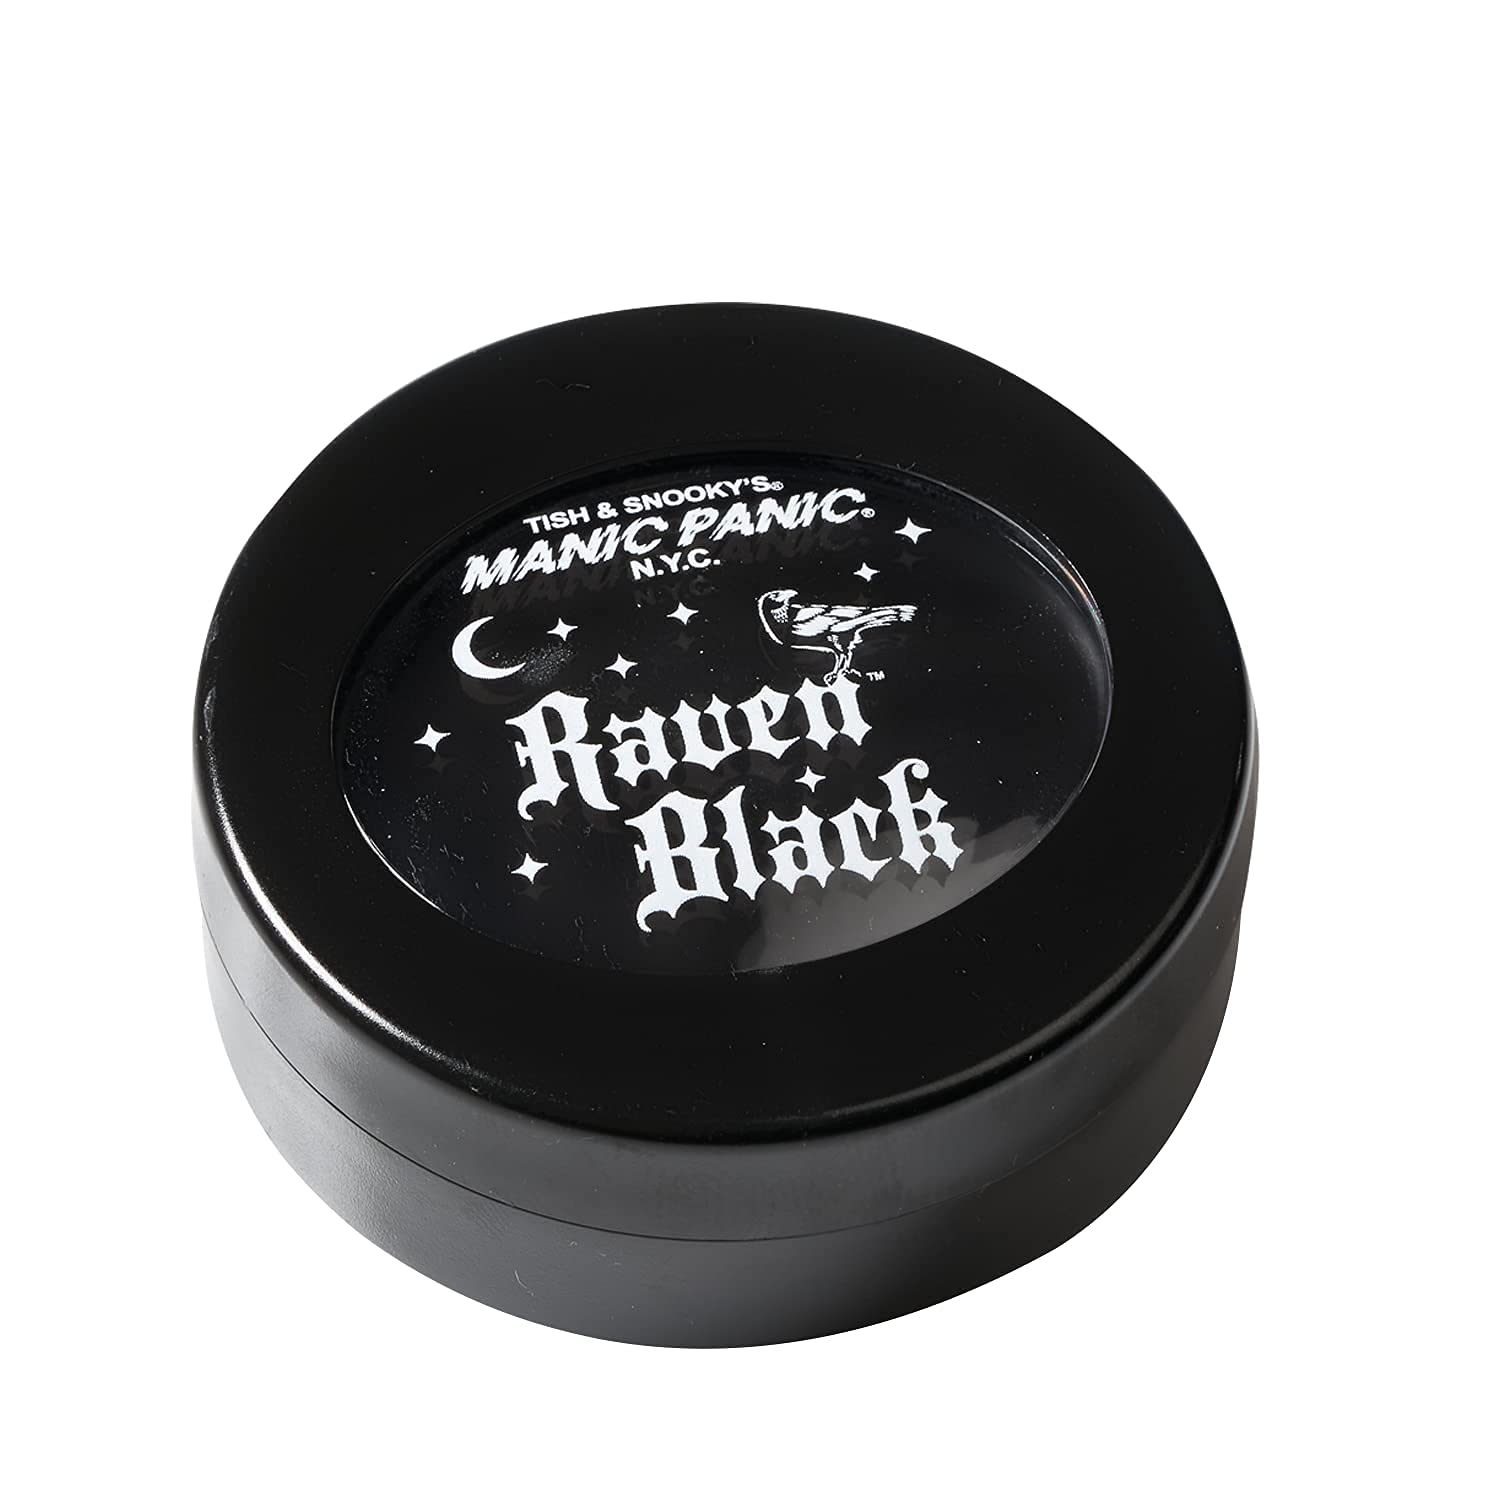 MANIC PANIC Black Raven Body & Face Paint Make-up - Full Coverage Black Face Paint & Black Body Makeup for Halloween & Everyday Use - Use as Makeup Base or Eyeliner - Set with Powder to Last All Day